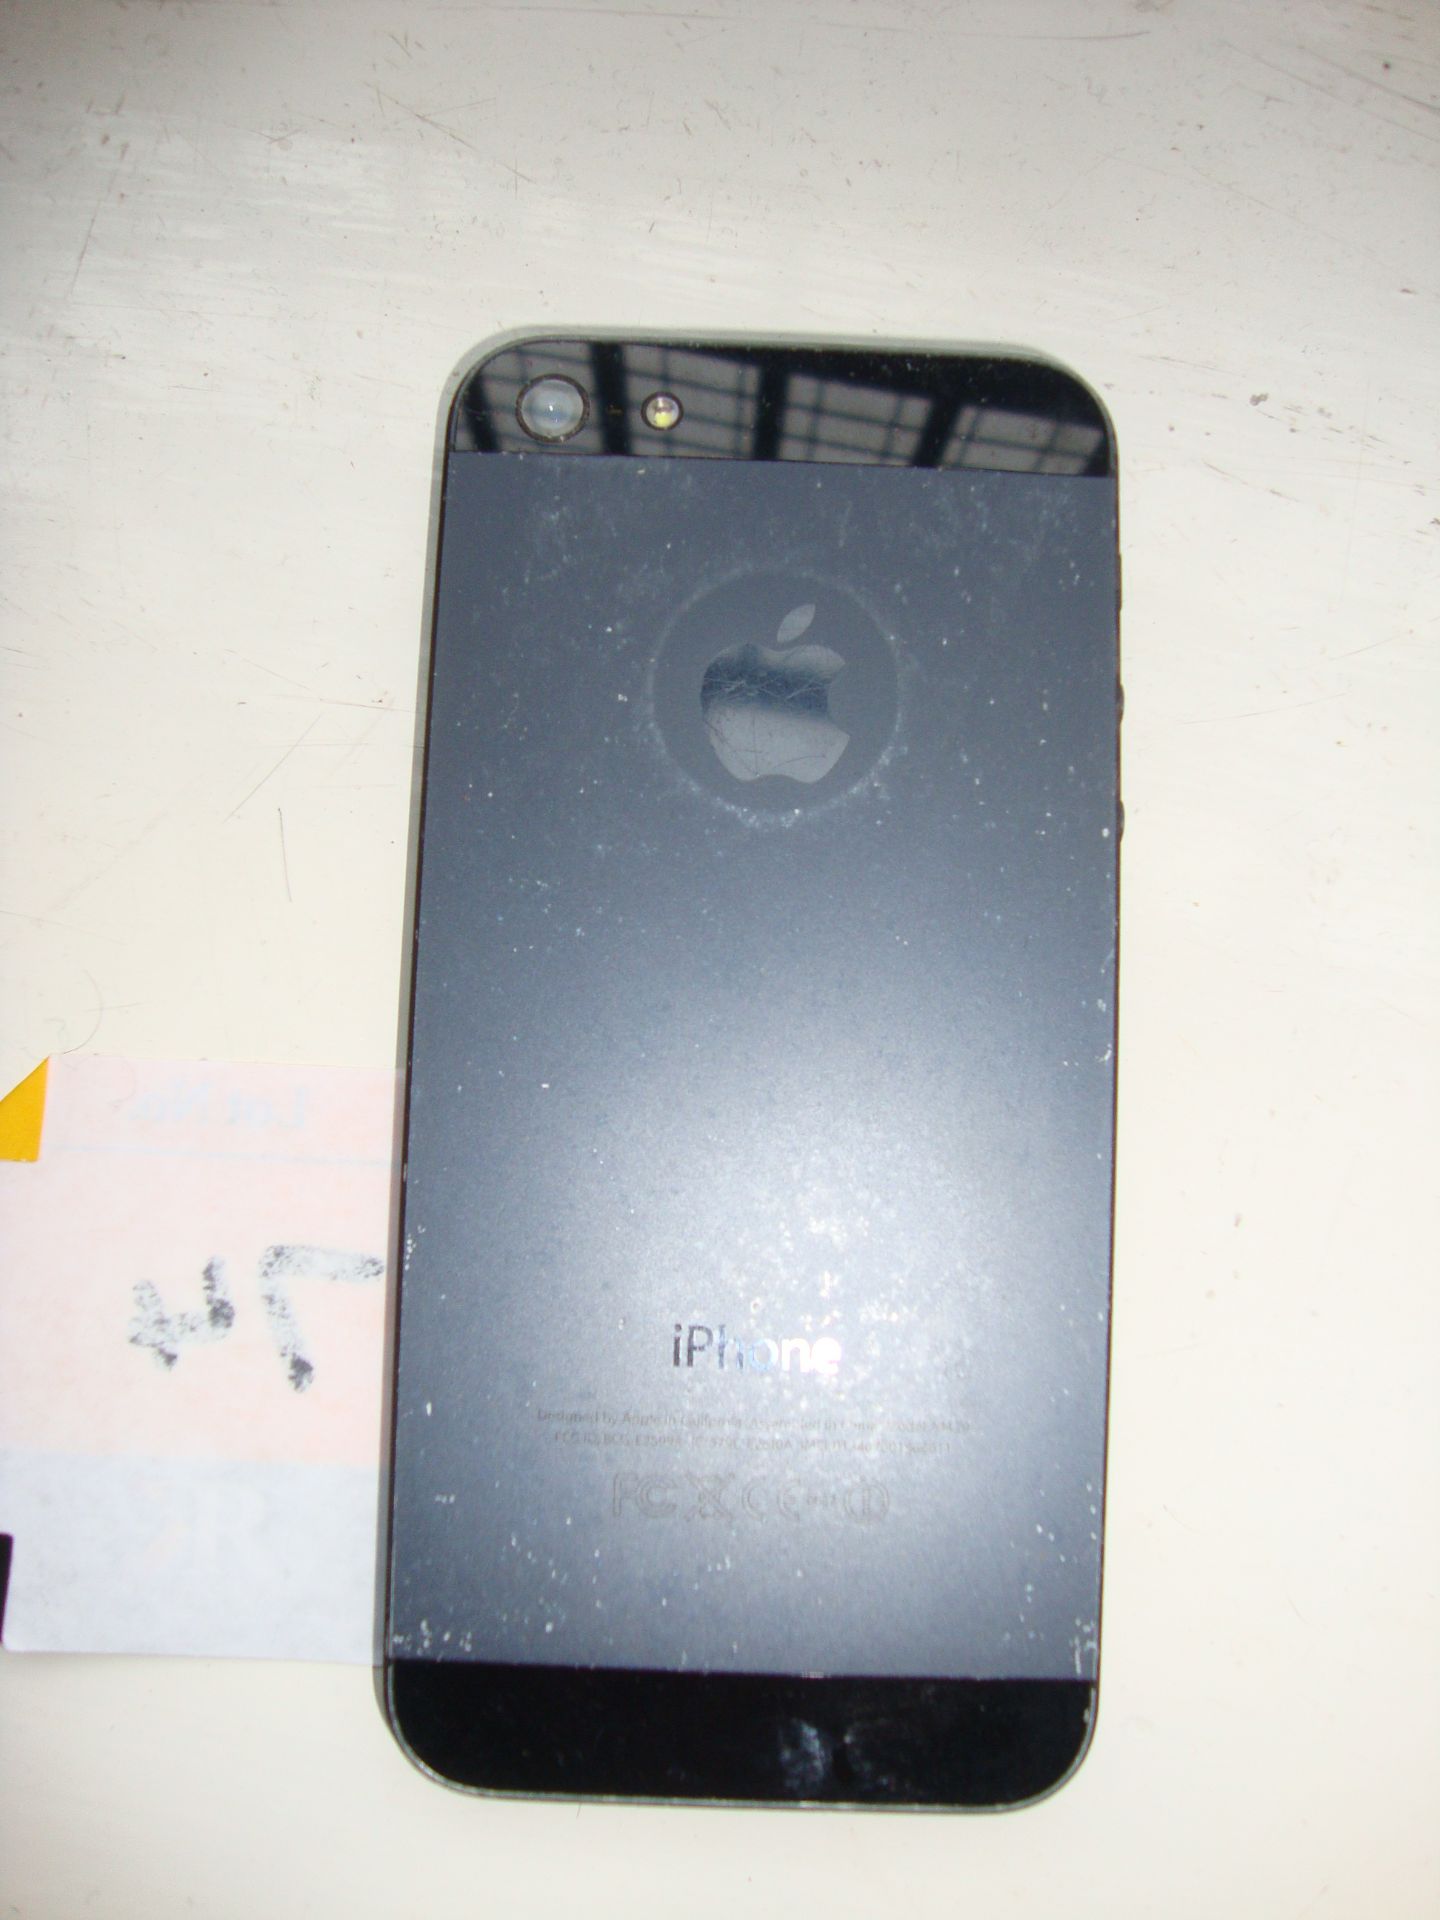 Apple iPhone 5 model A1429 - no accessories - Image 4 of 6